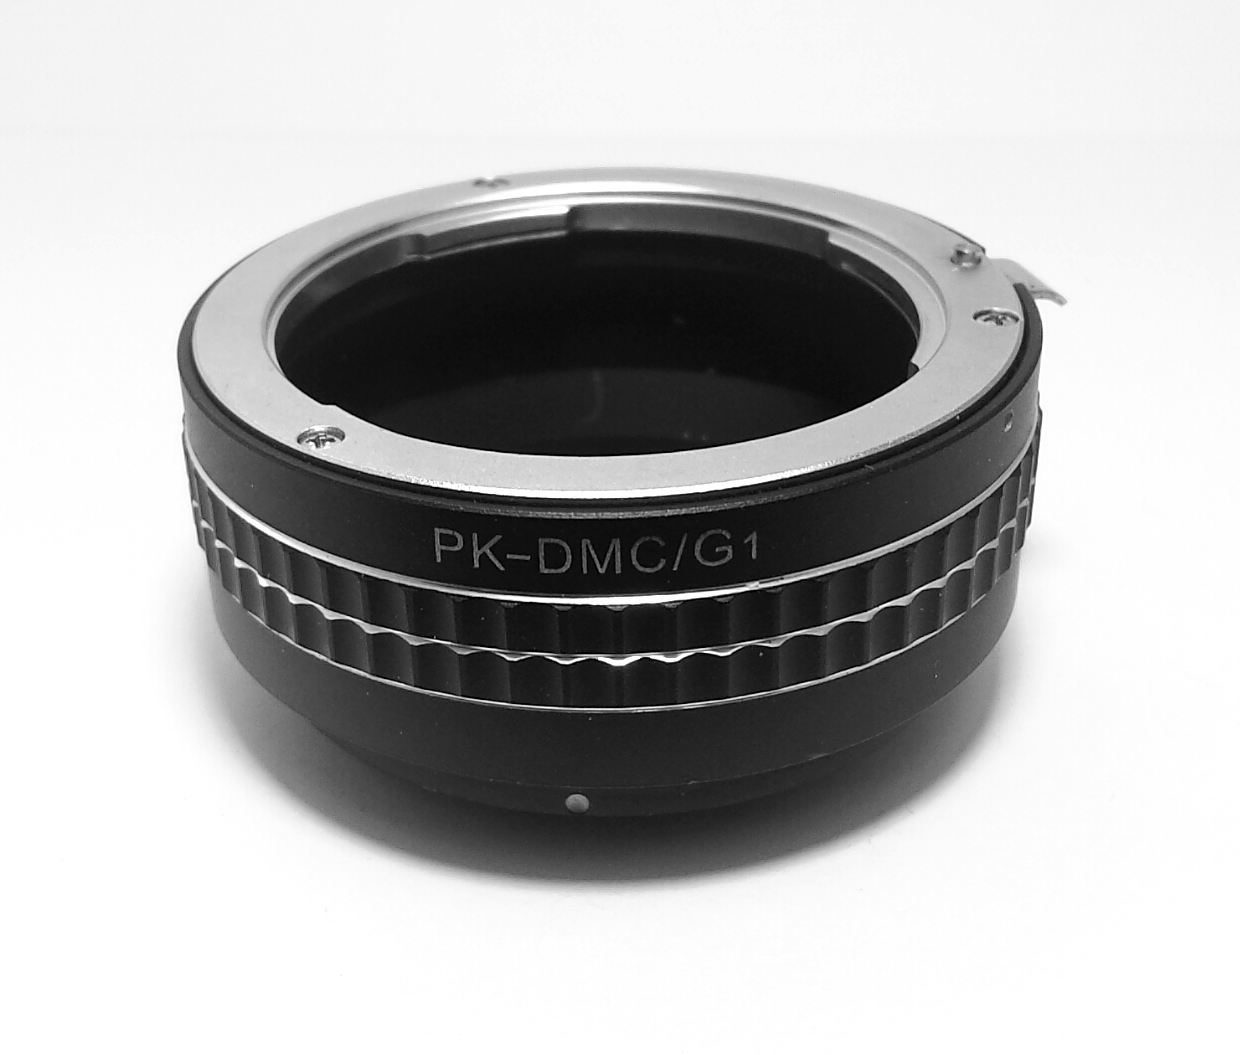 Pentax Lens to Micro 4/3 Camera Body Adapter